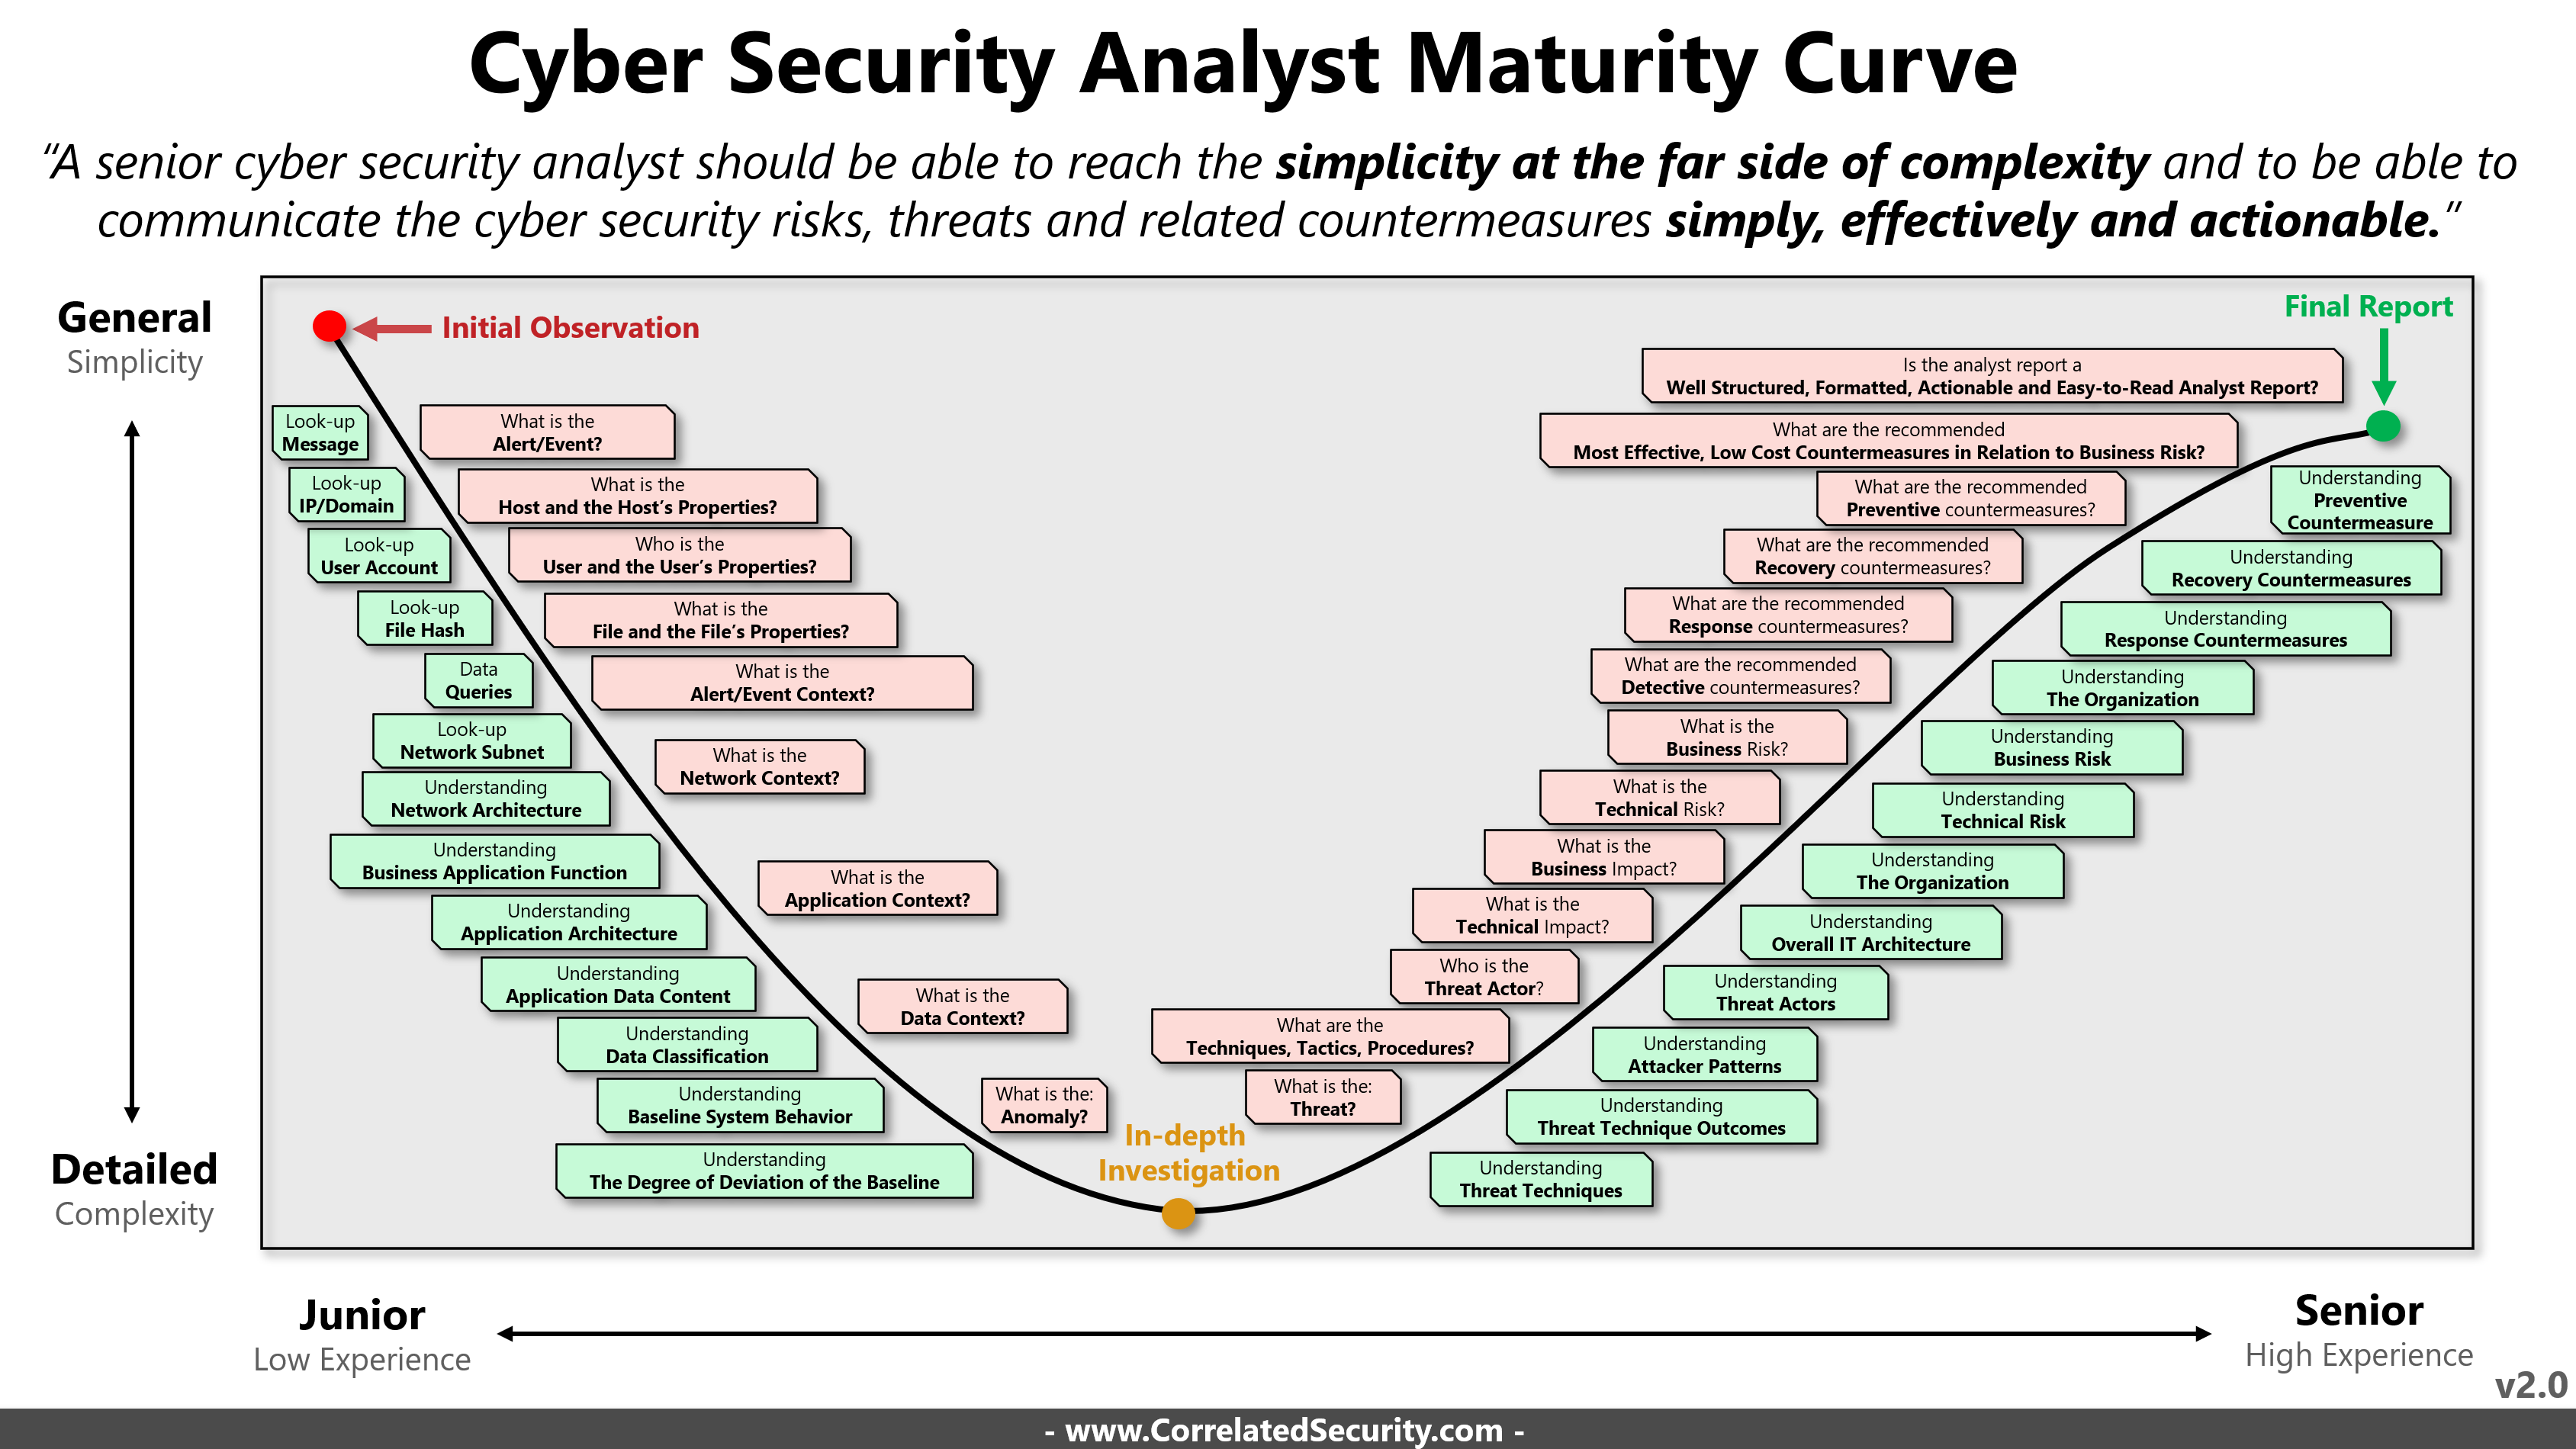 Cyber Security Analyst Maturity Curve